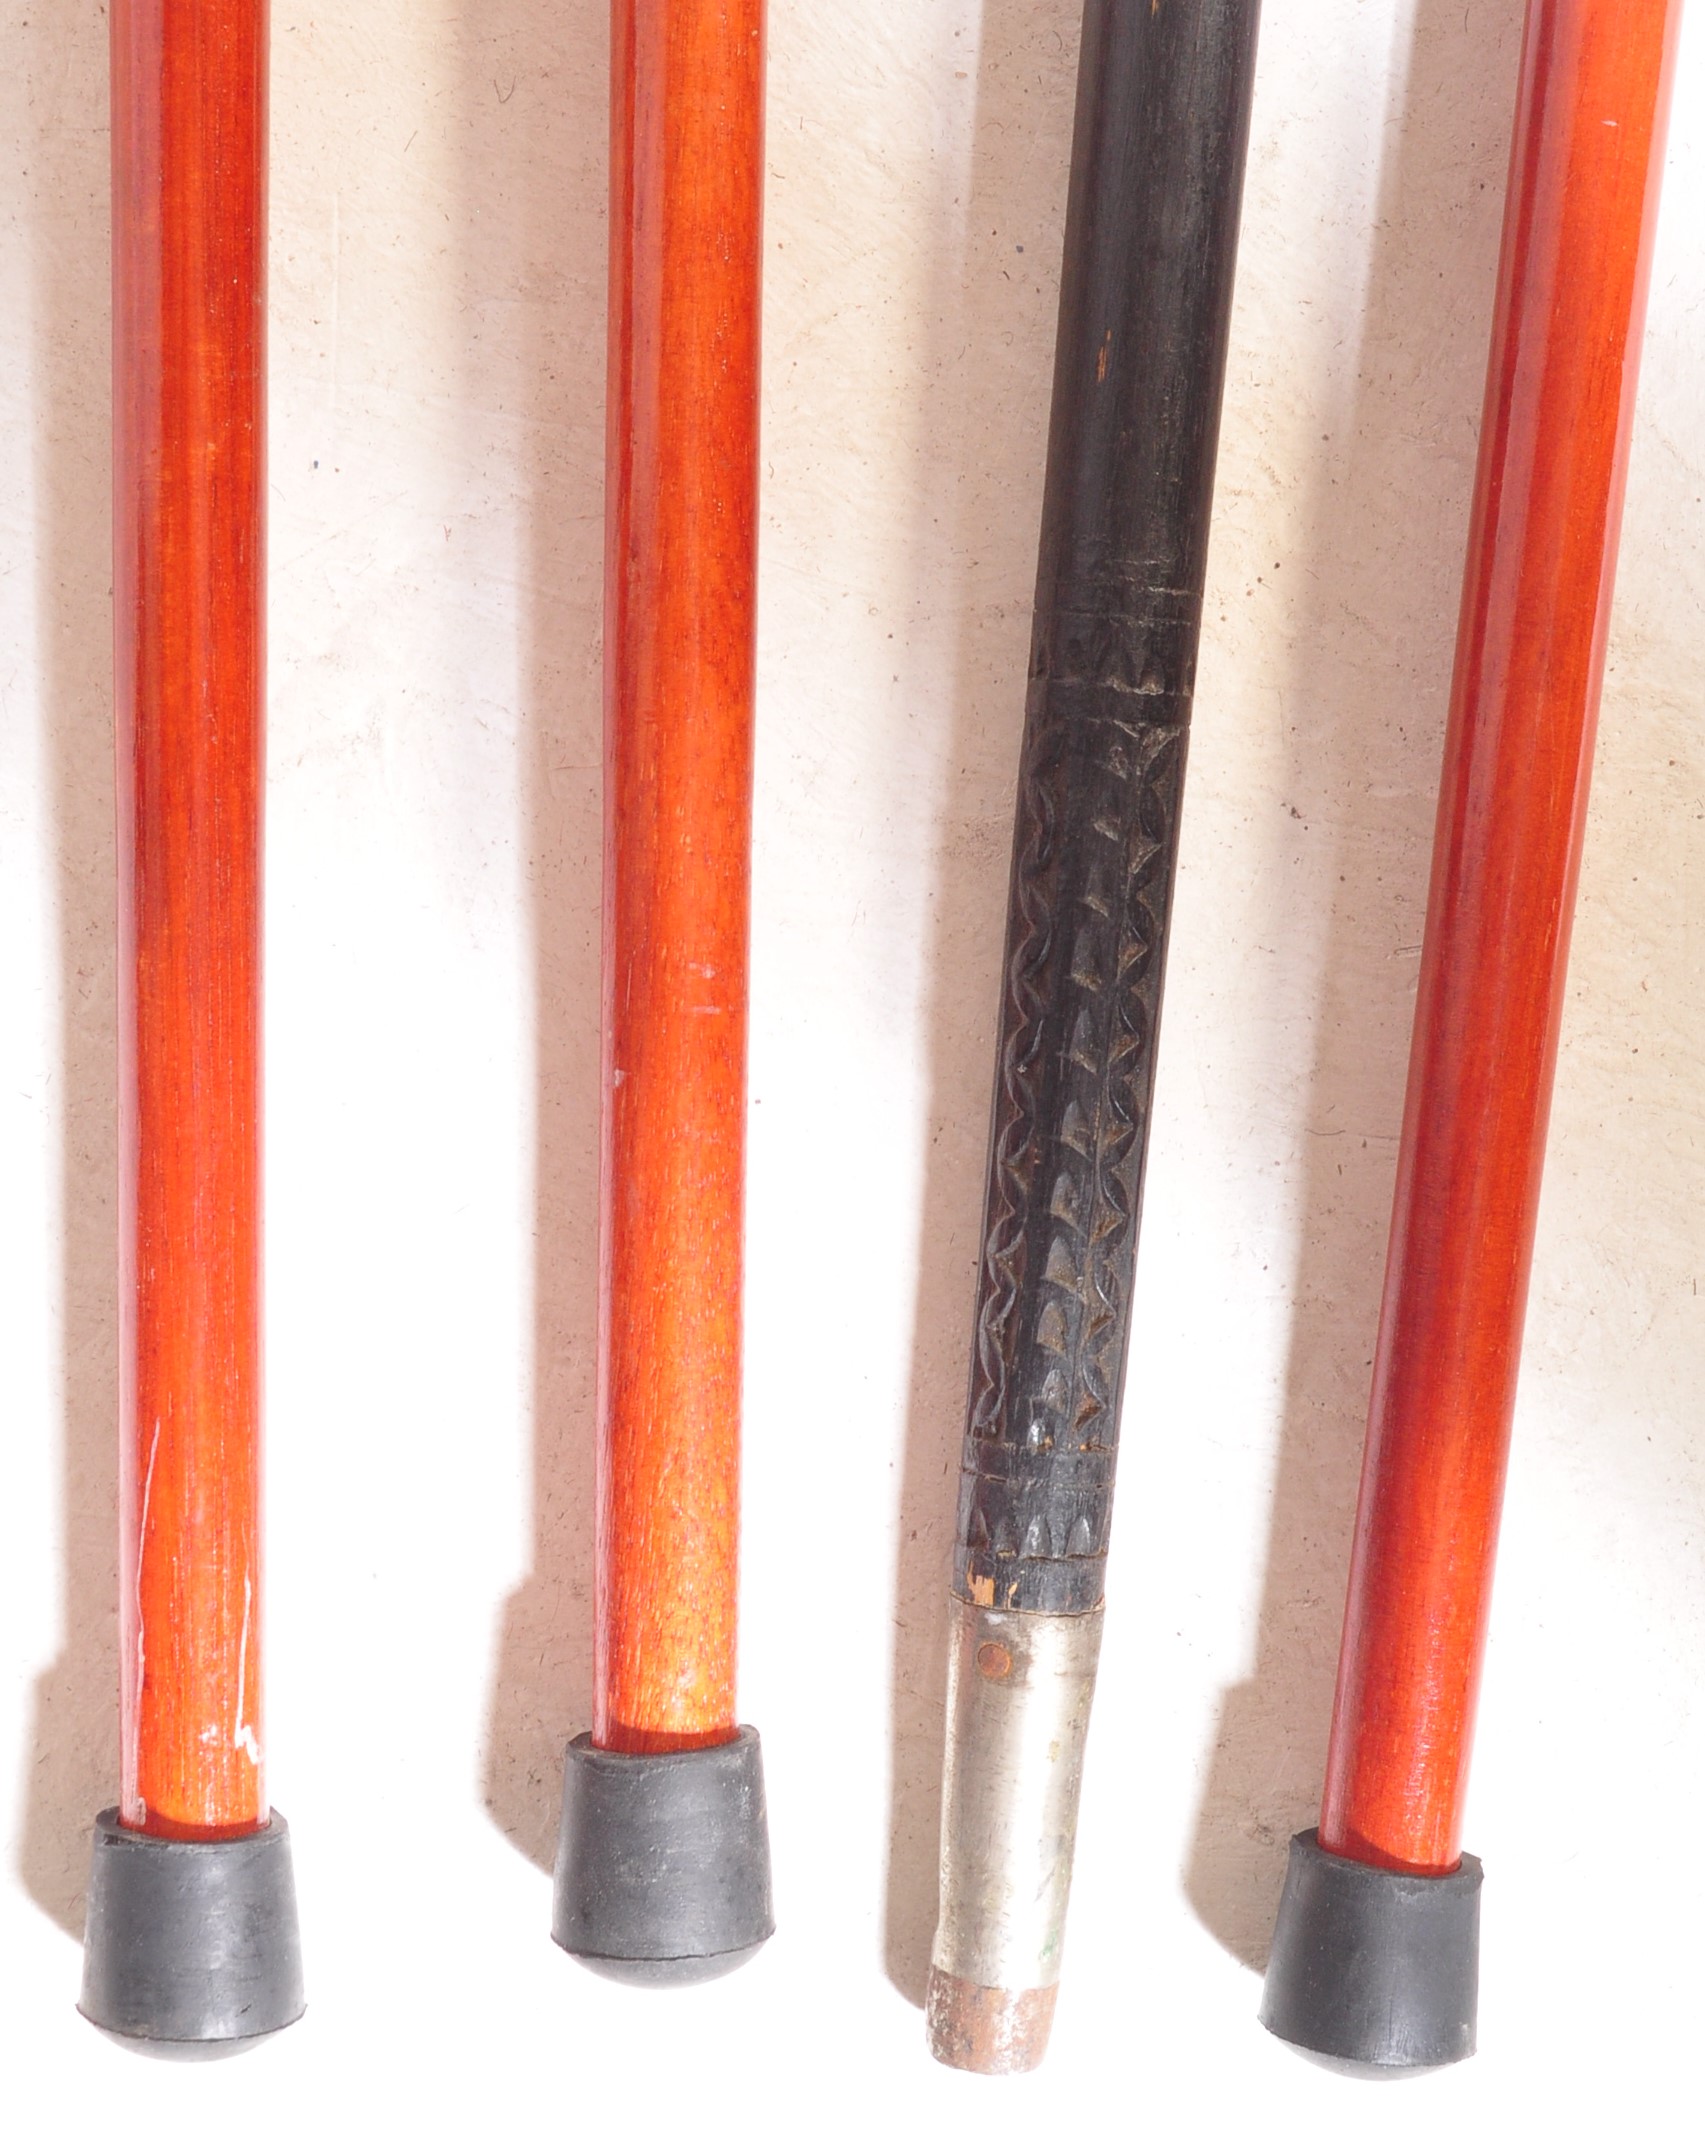 COLLECTION OF FOUR VINTAGE 20TH CENTURY WALKING STICKS - Image 7 of 7